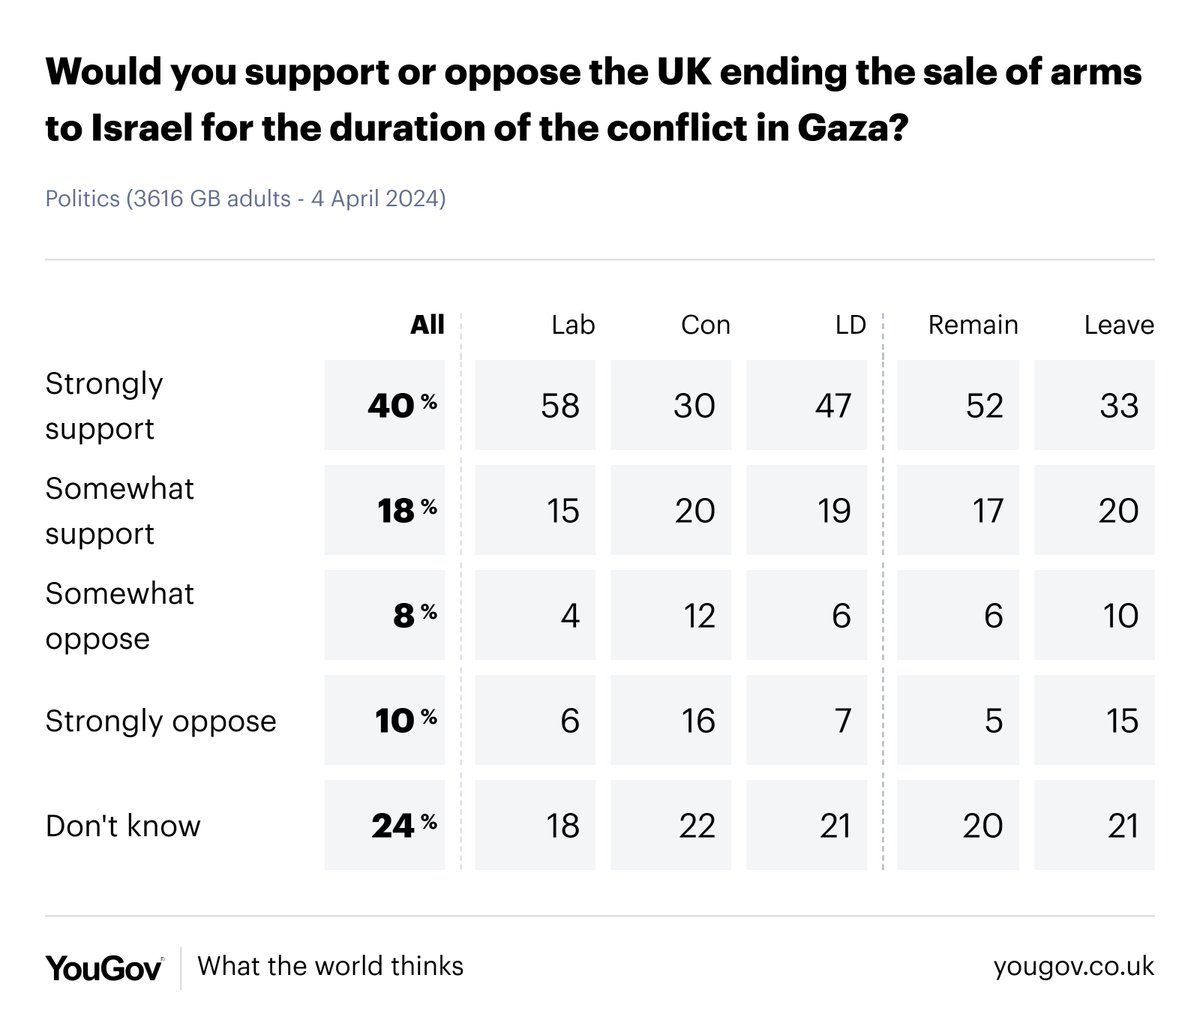 Would you support or oppose the UK ending the sale of arms to Israel for the duration of the conflict in Gaza? Support: 58% Oppose: 18% yougov.co.uk/topics/politic…